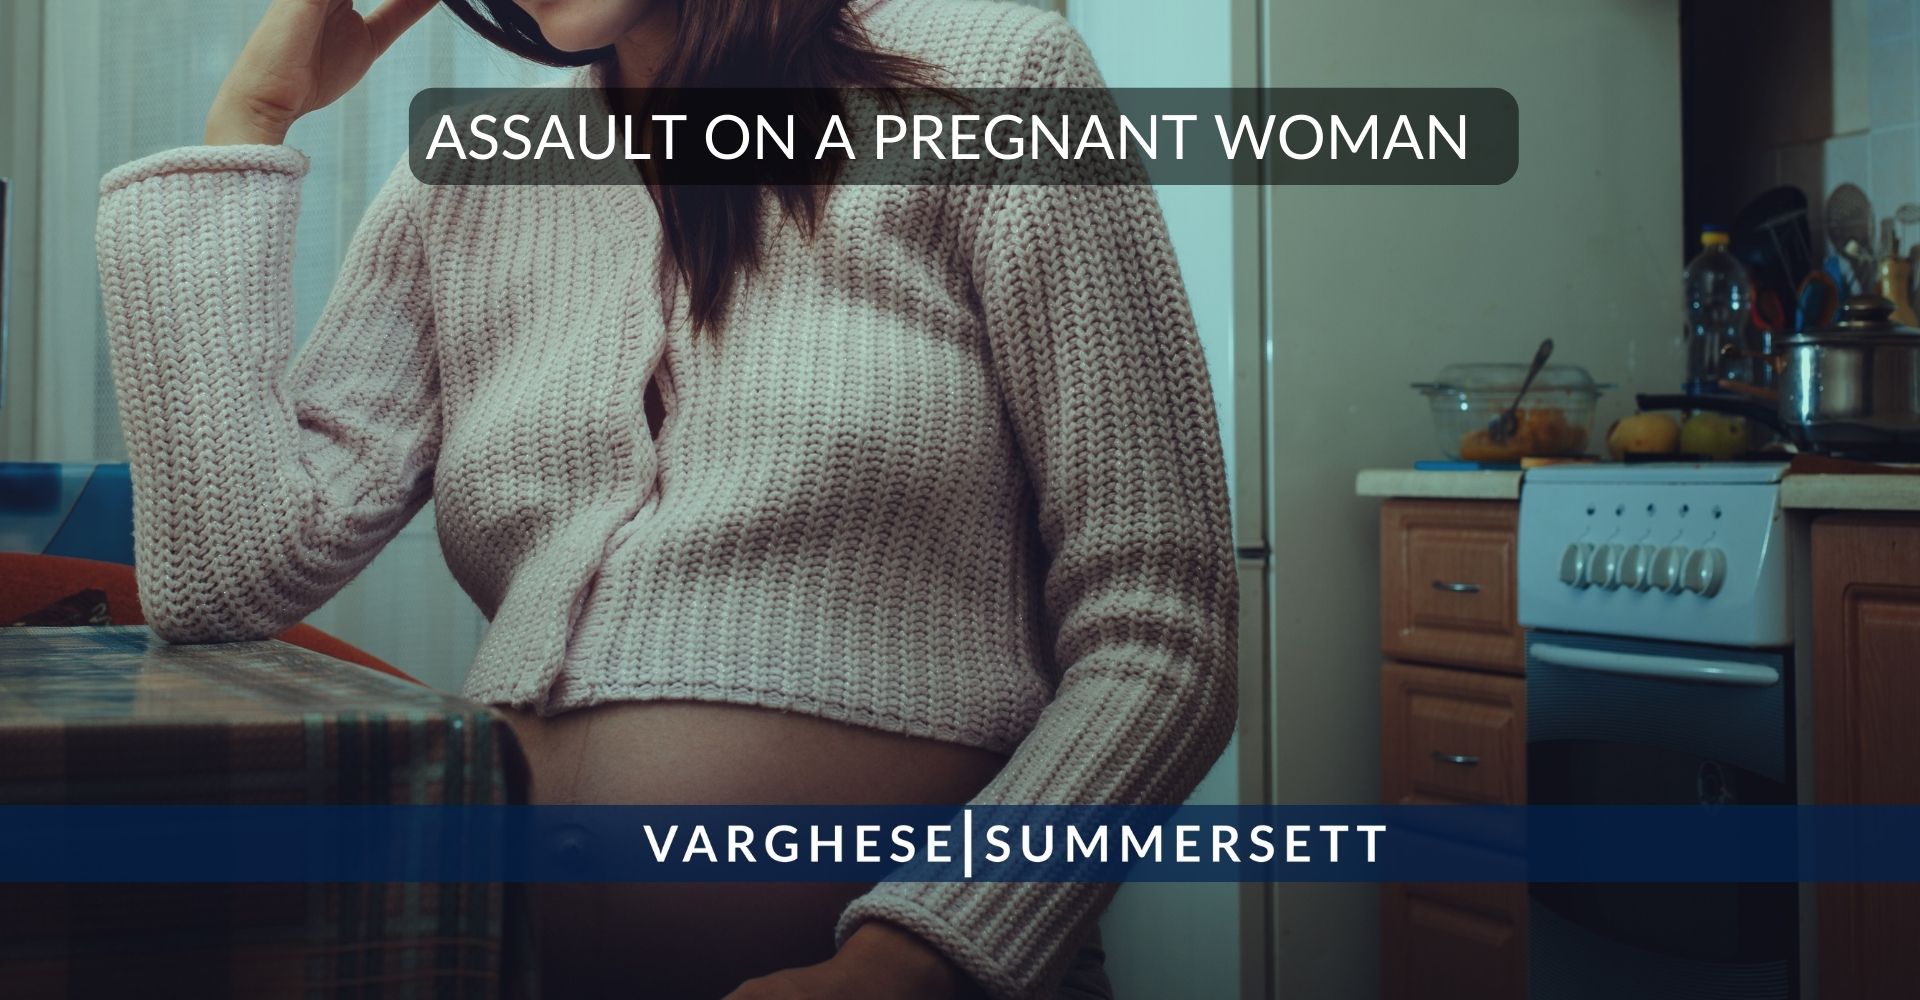 Assault on a Pregnant Women in Texas | Crime & Consequences